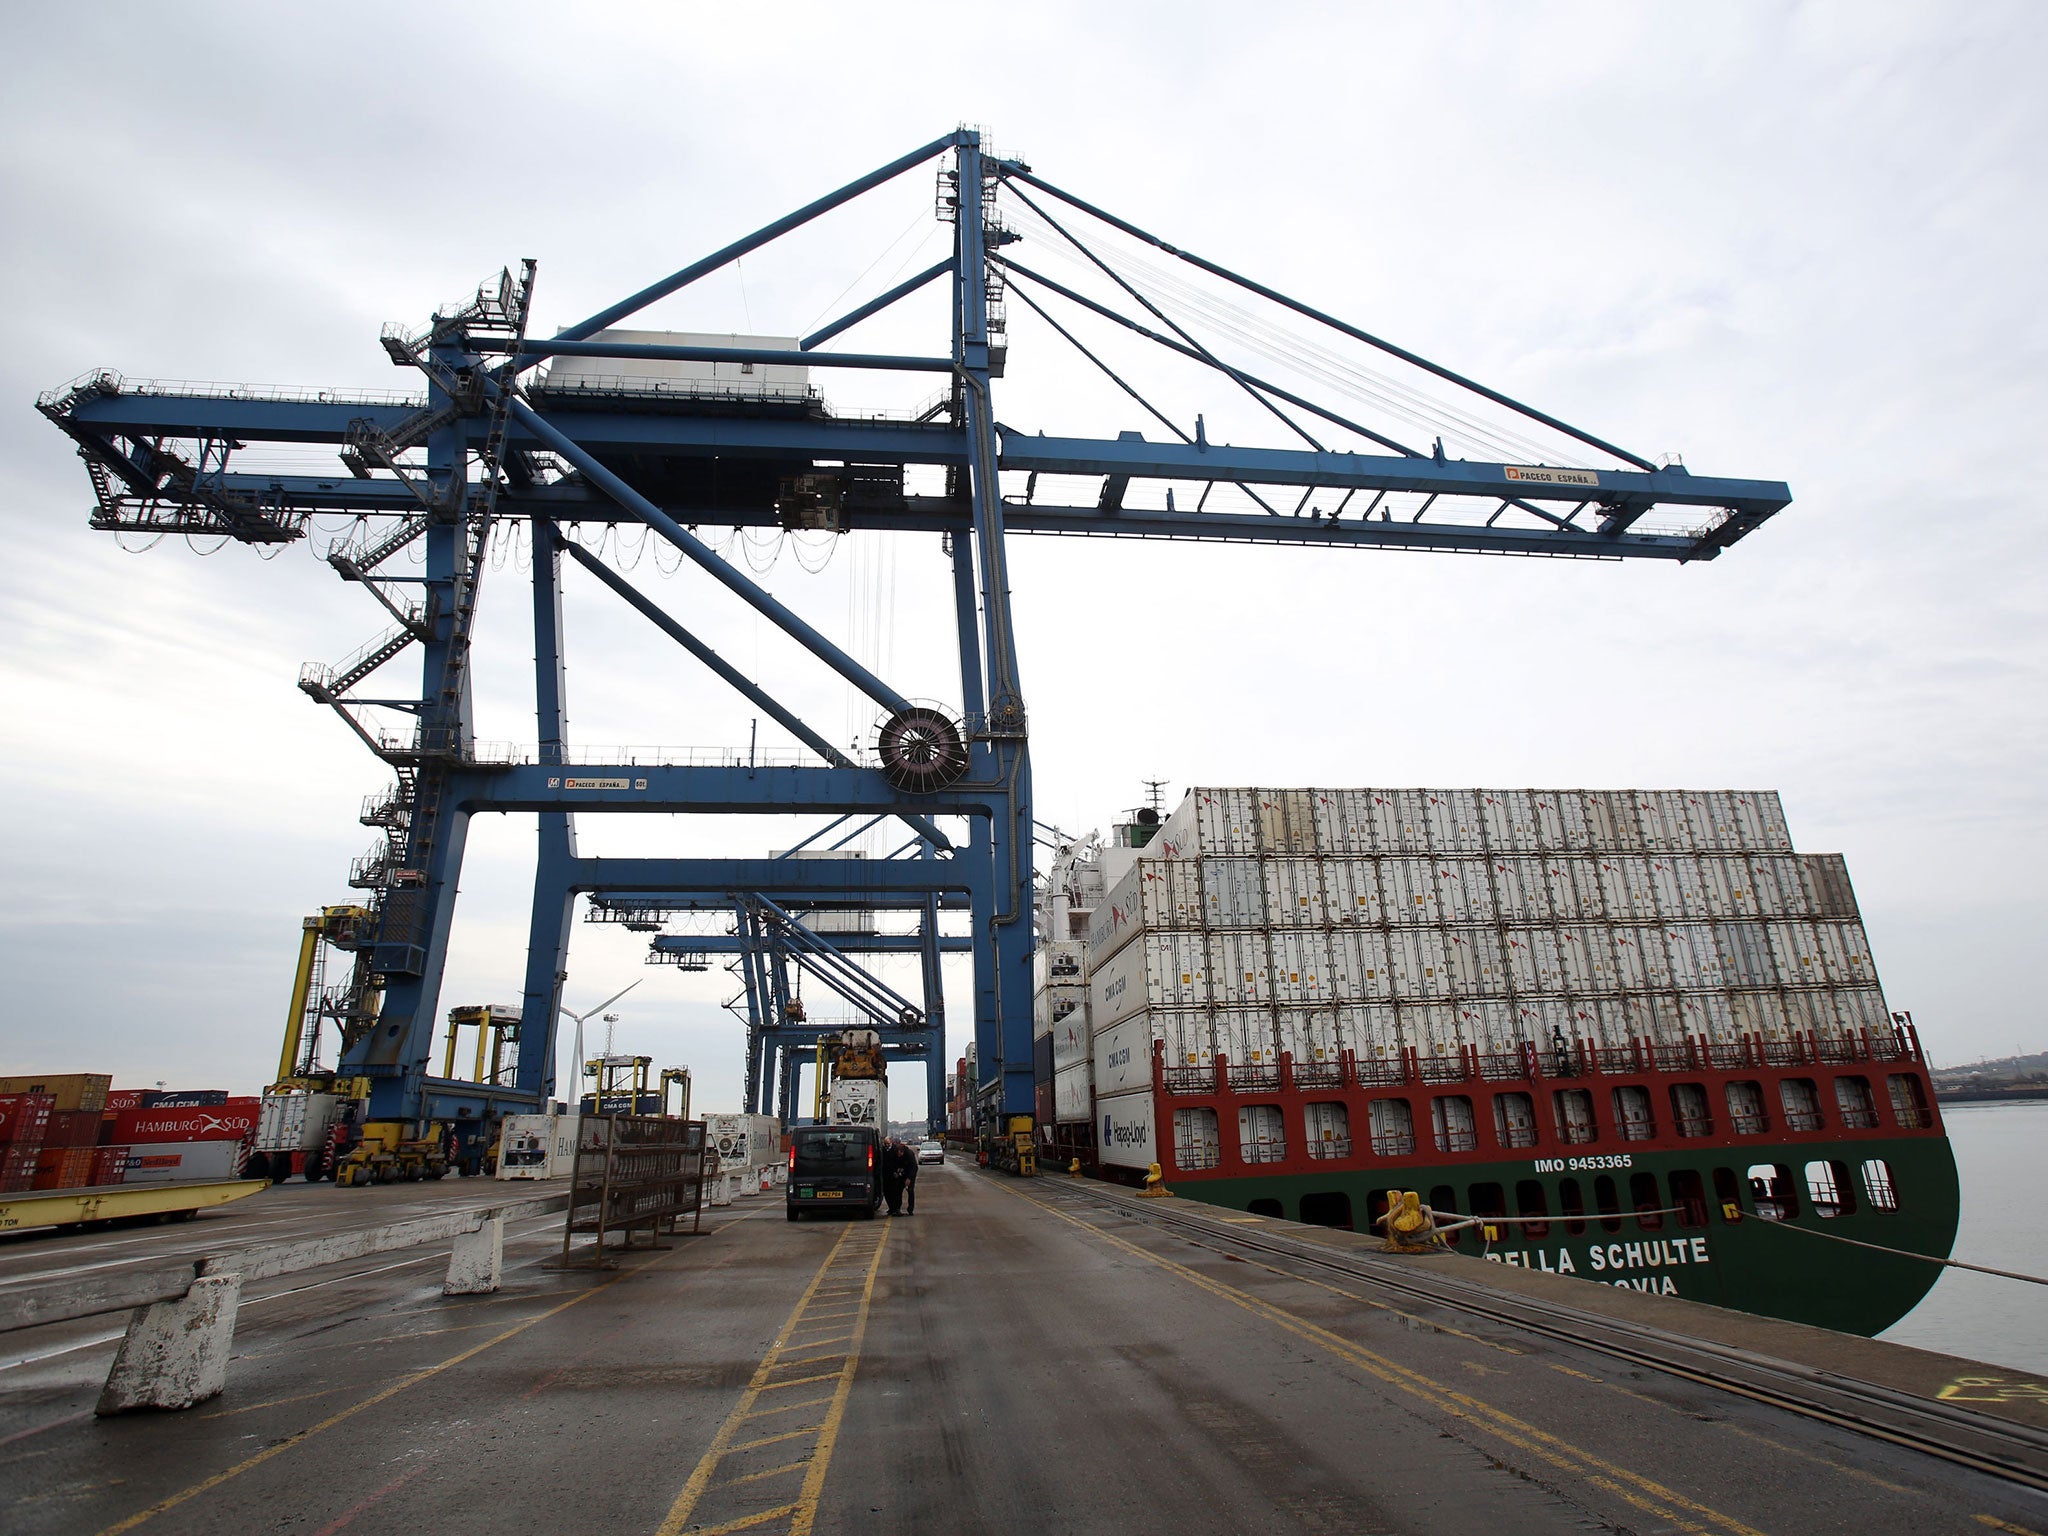 File photo dated 31/3/2014 of a crane along the quay side at Tilbury Docks in Essex. A man has died and other people have been taken to local hospitals with "significant health problems" after 31 adults and children were found inside a shipping container